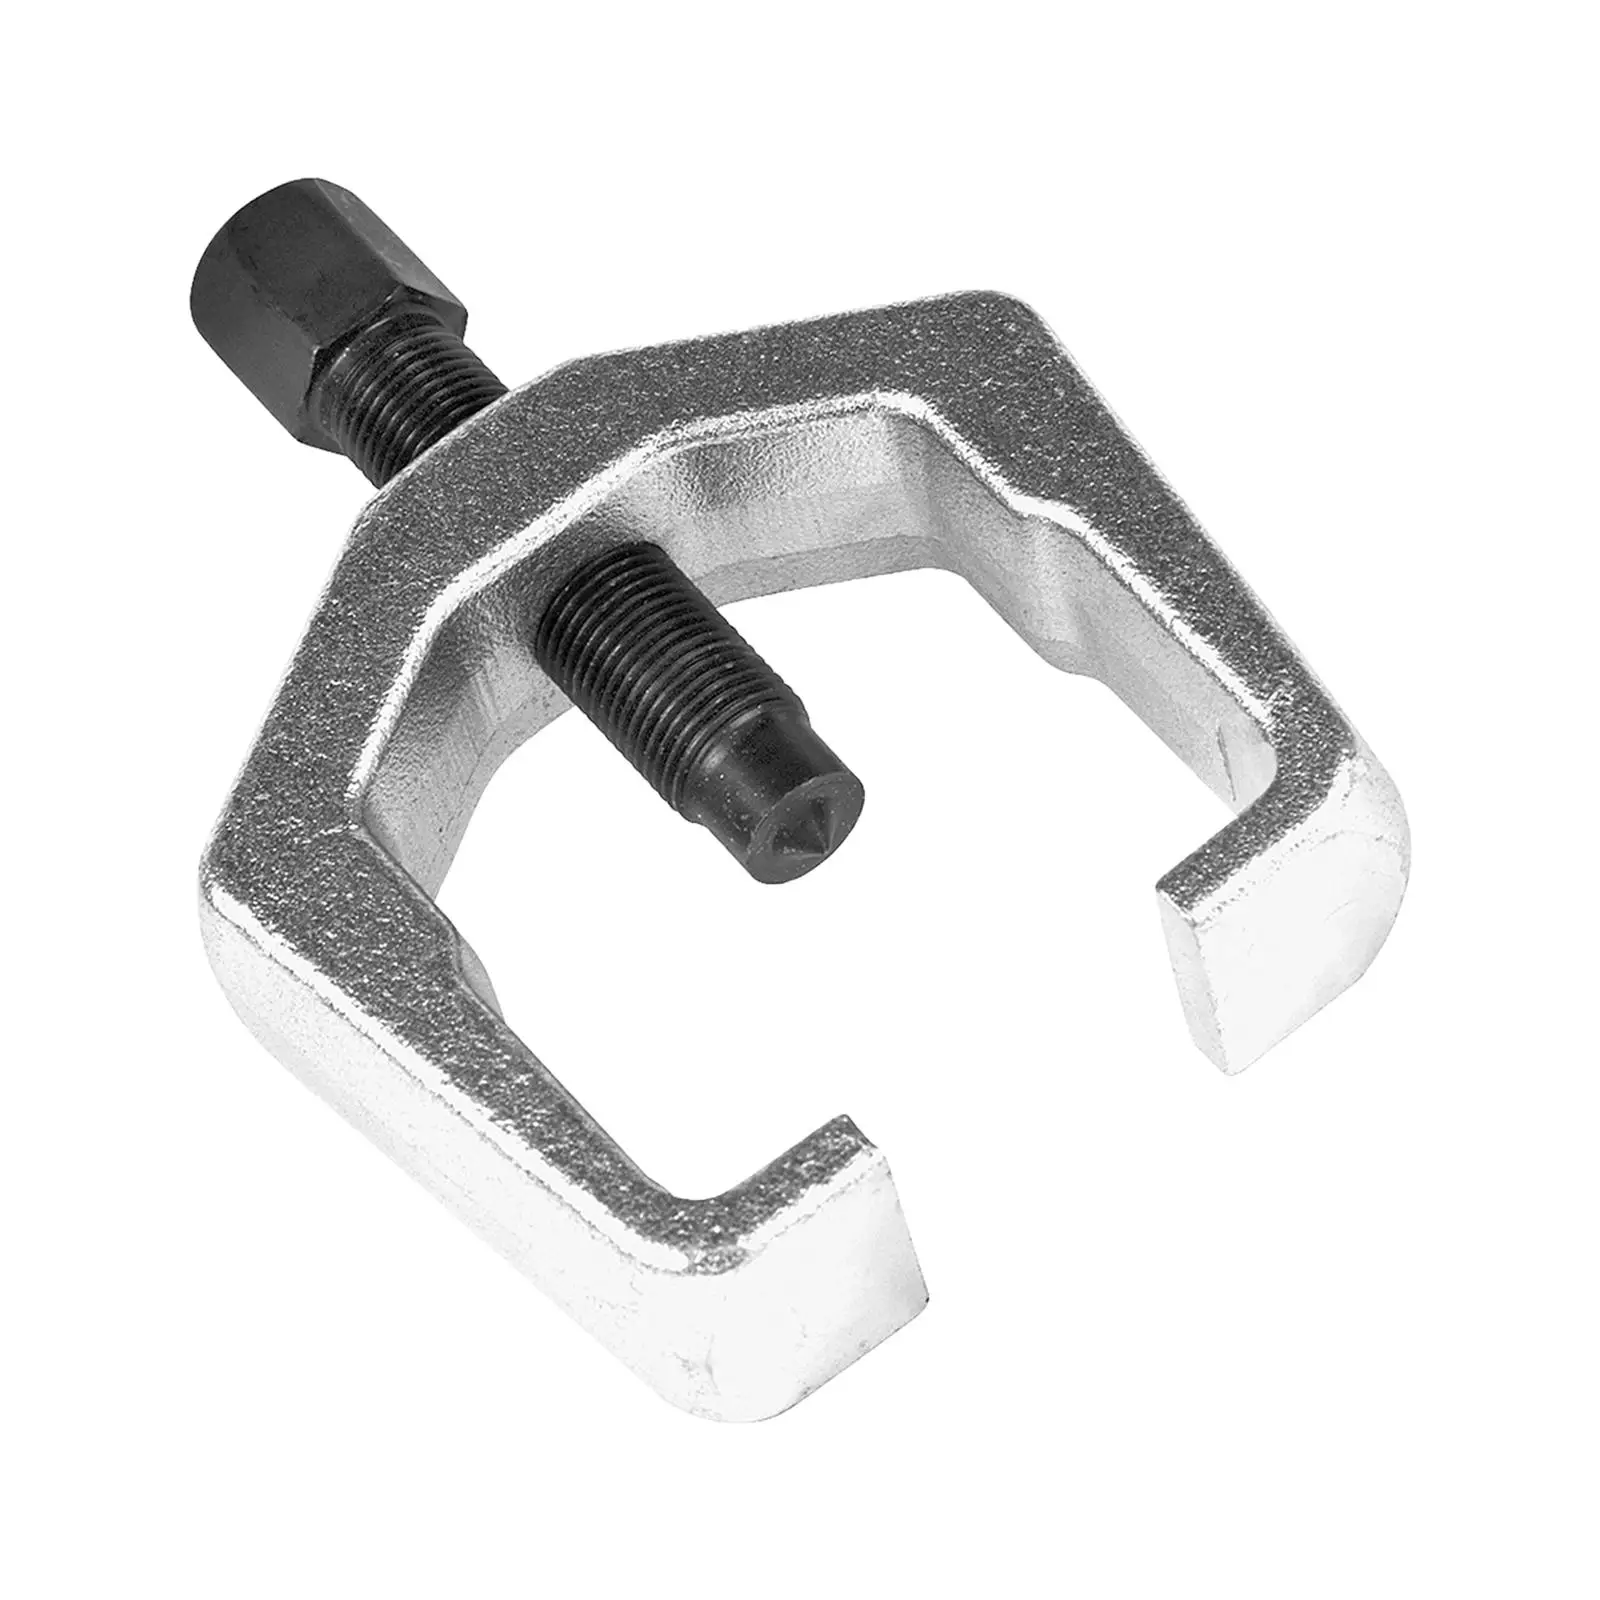 Slack Adjuster Puller Trucks Repair Tool Durable Iron Works on Automatic Adjusters Sturdy Easy to Operate Trailers Remover Tool